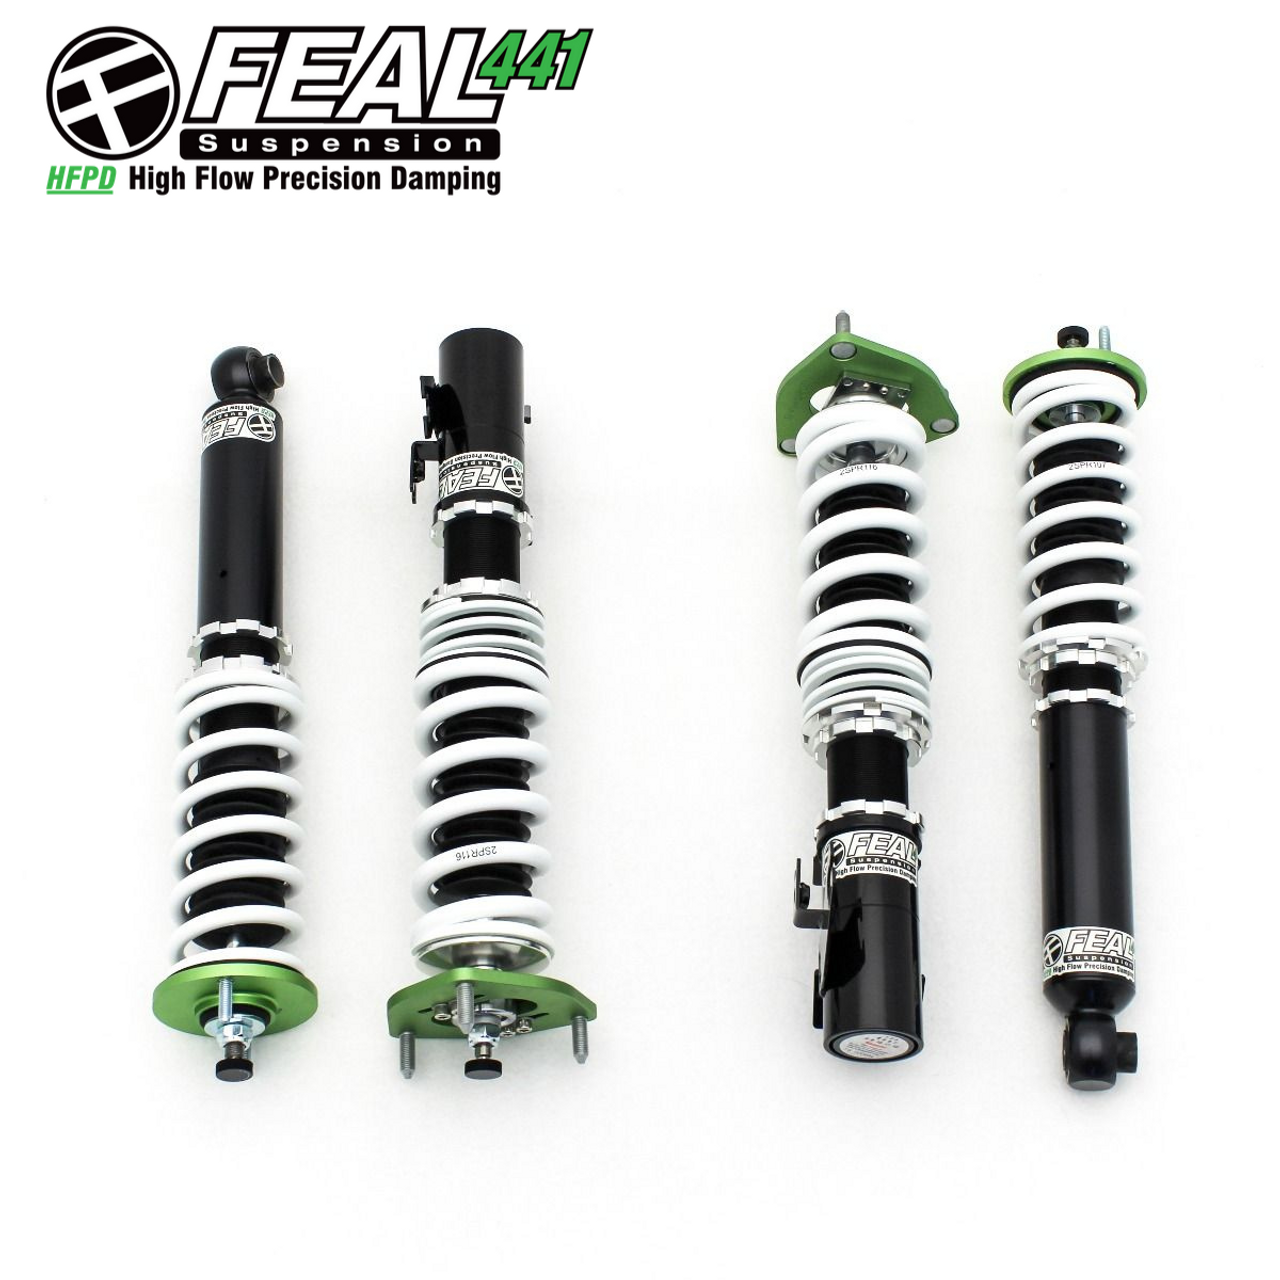 Feal Suspension 441 Coilover Kit, RWD - Nissan R33 GTS-T